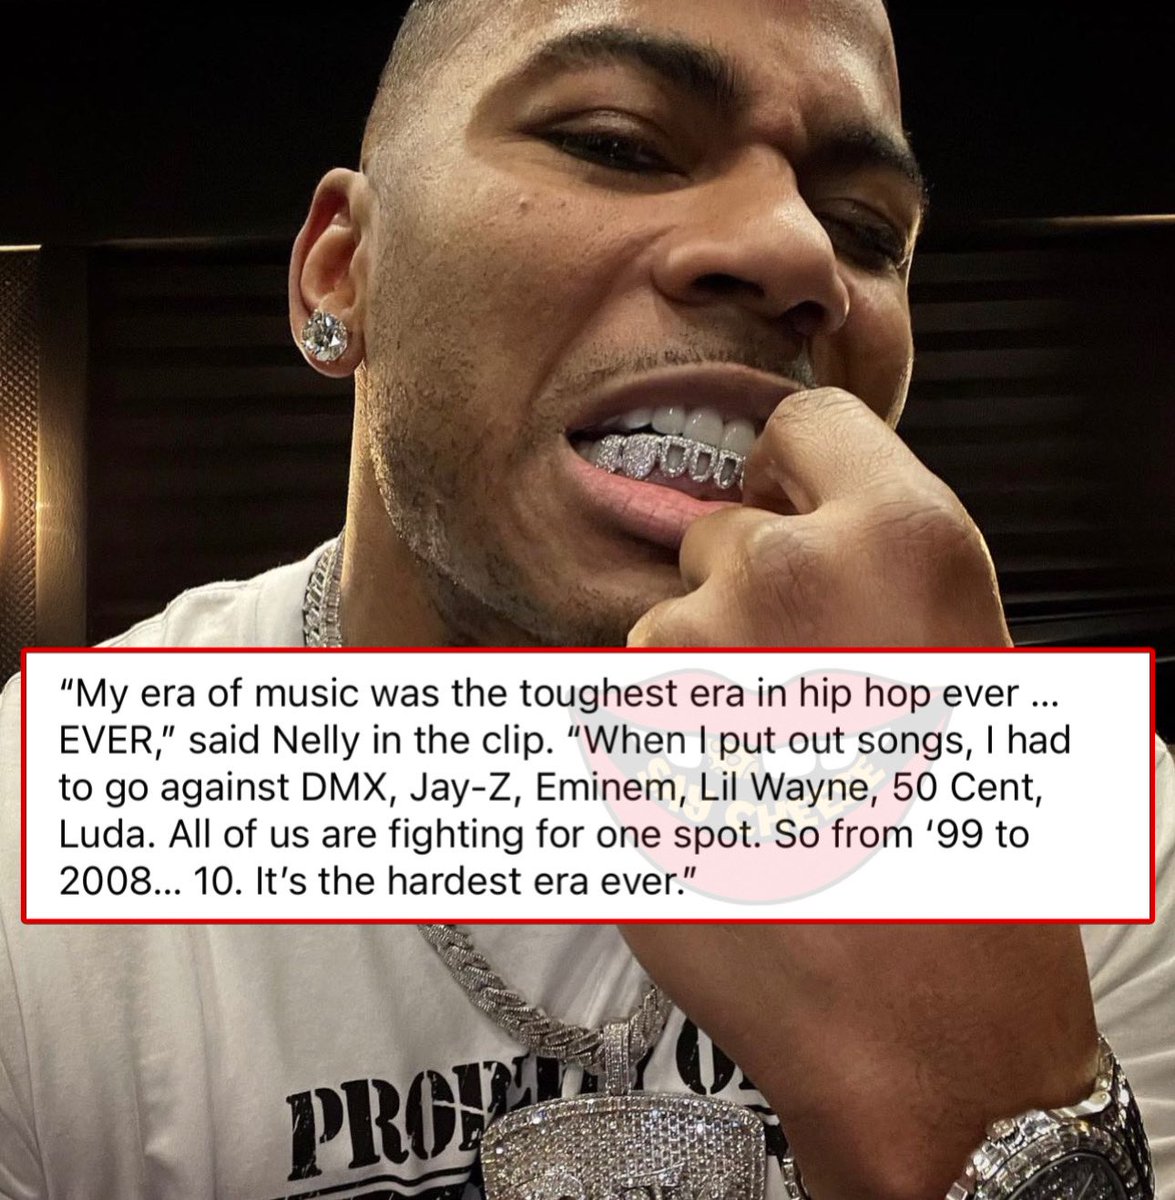 Nelly claims his era of music was the 'toughest era in hip-hop ever.'

'When I put out songs, I had to go against DMX, JAY-Z, Eminem, Lil Wayne, 50 Cent, Luda – all of us are fighting for one spot.'